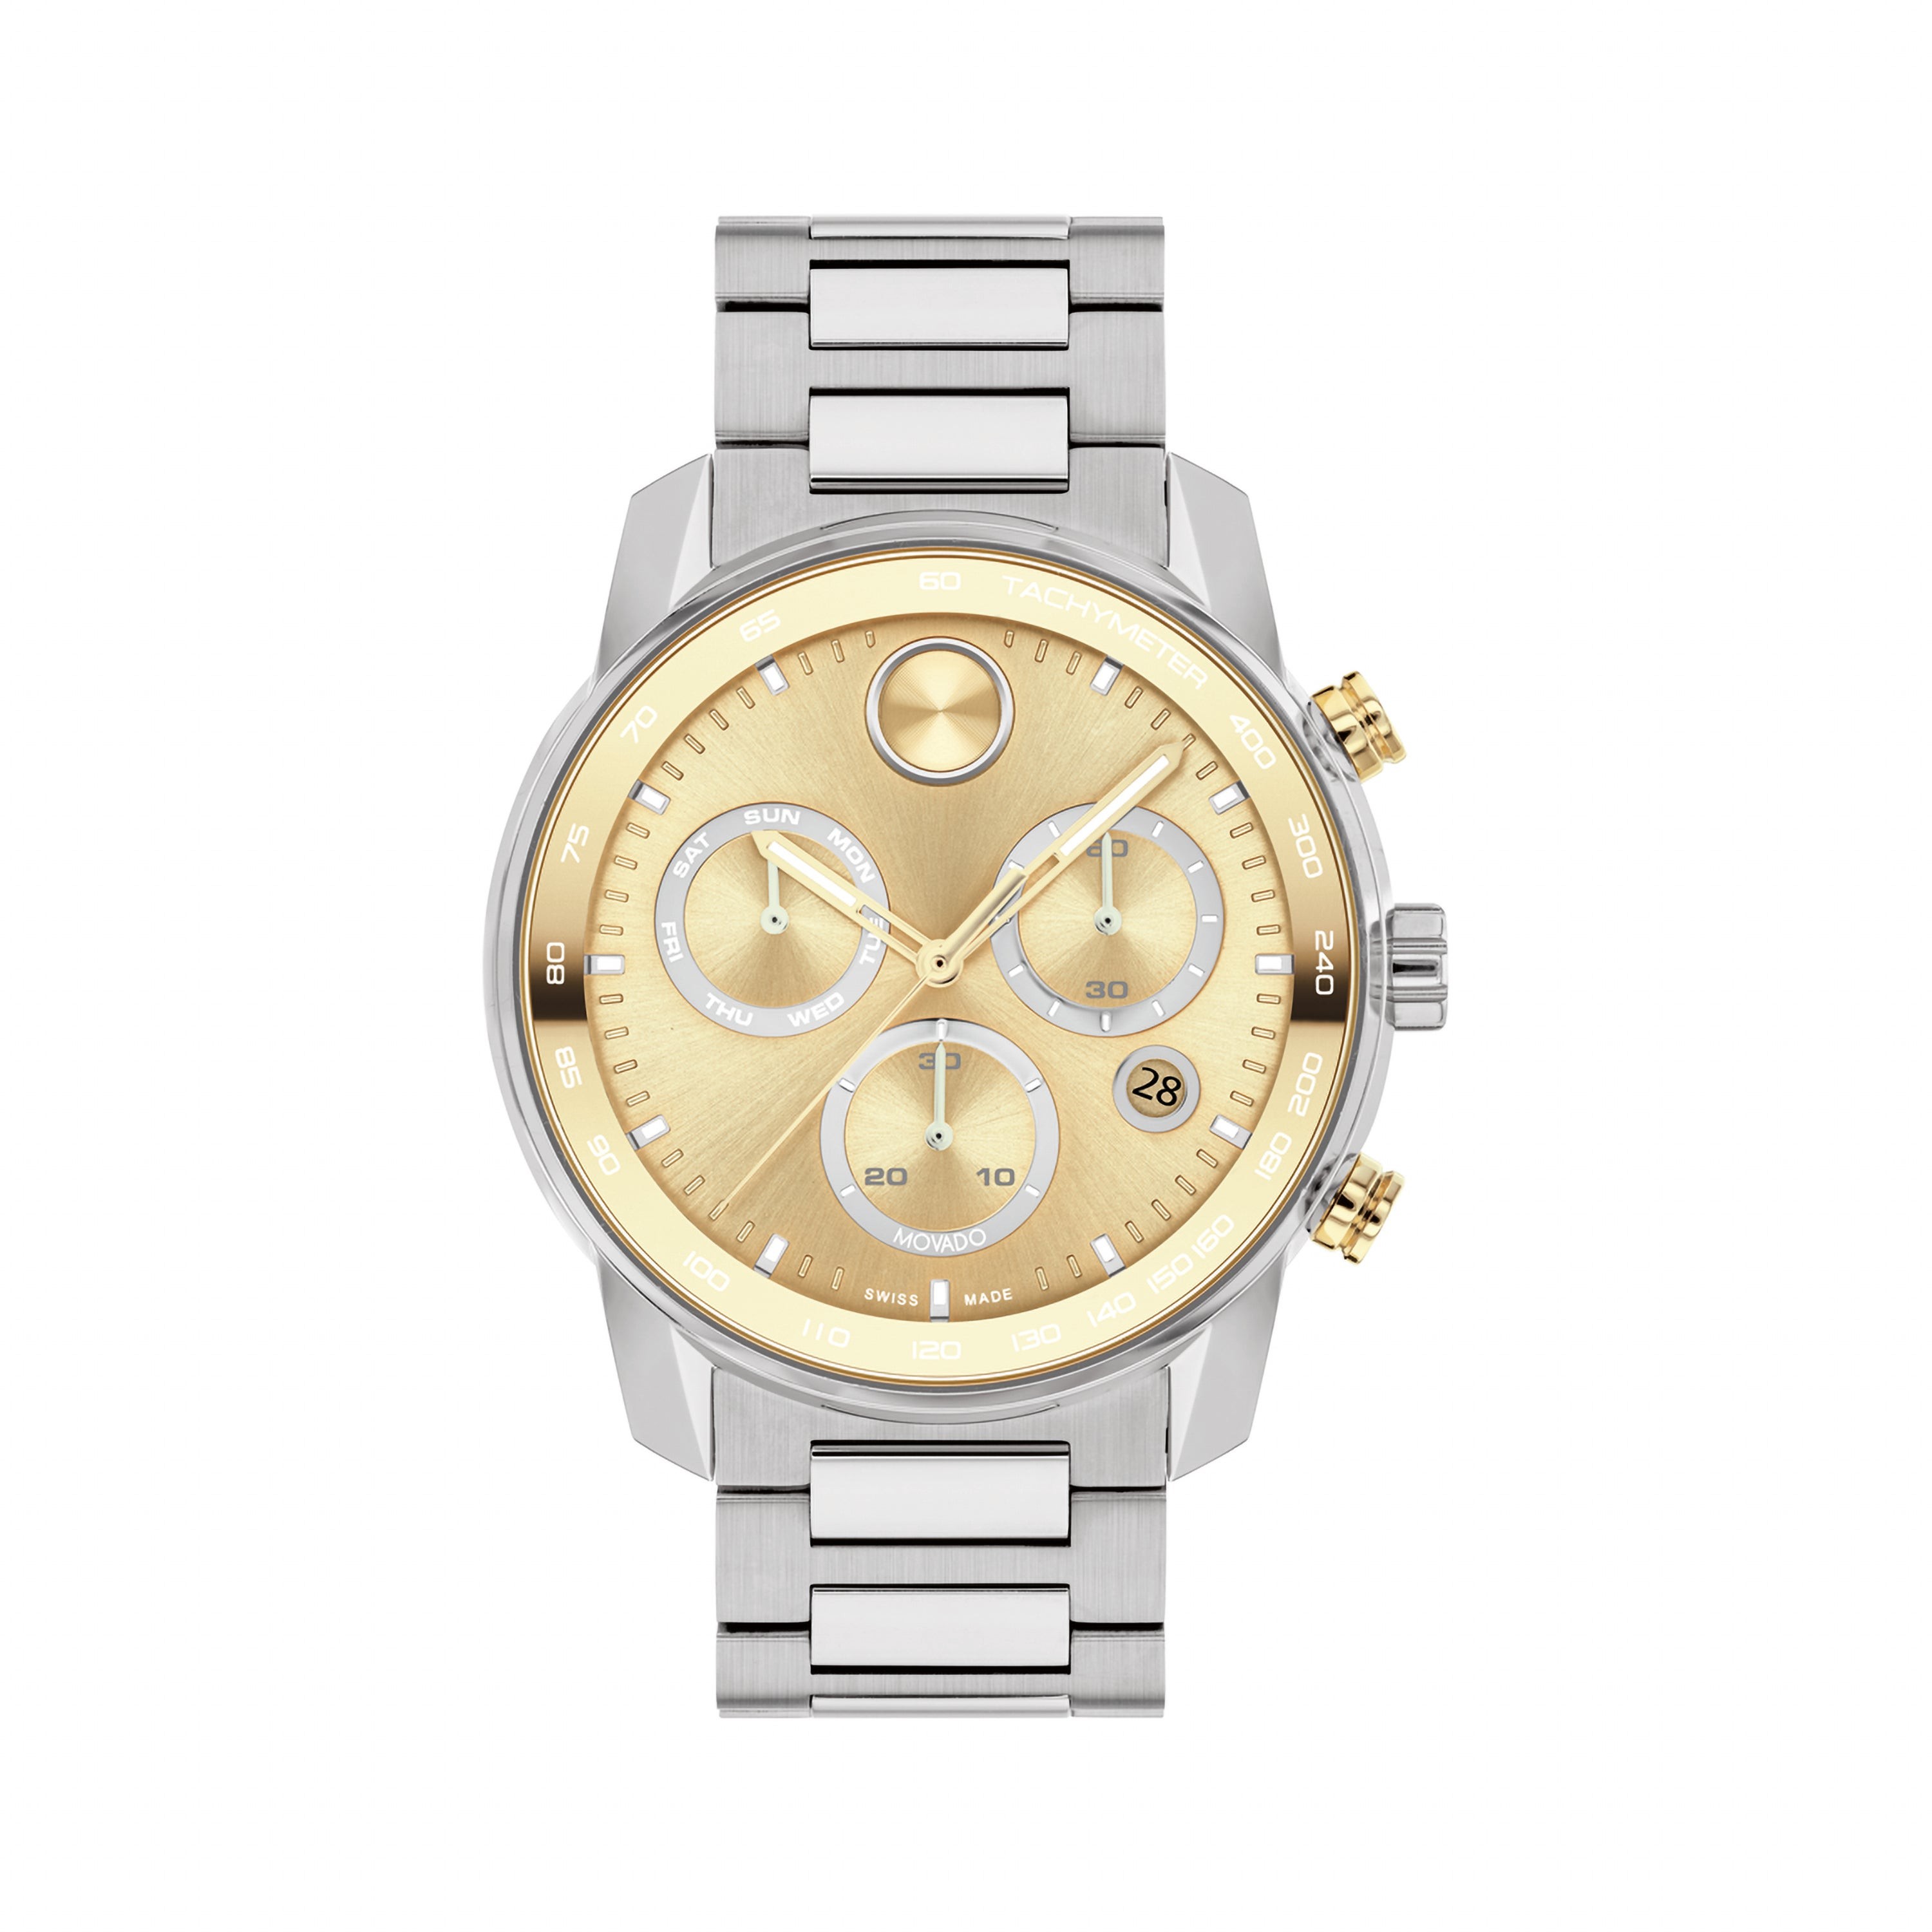 Mens BOLD Verso Chronograph Silver-Tone Stainless Steel Watch Gold Dial